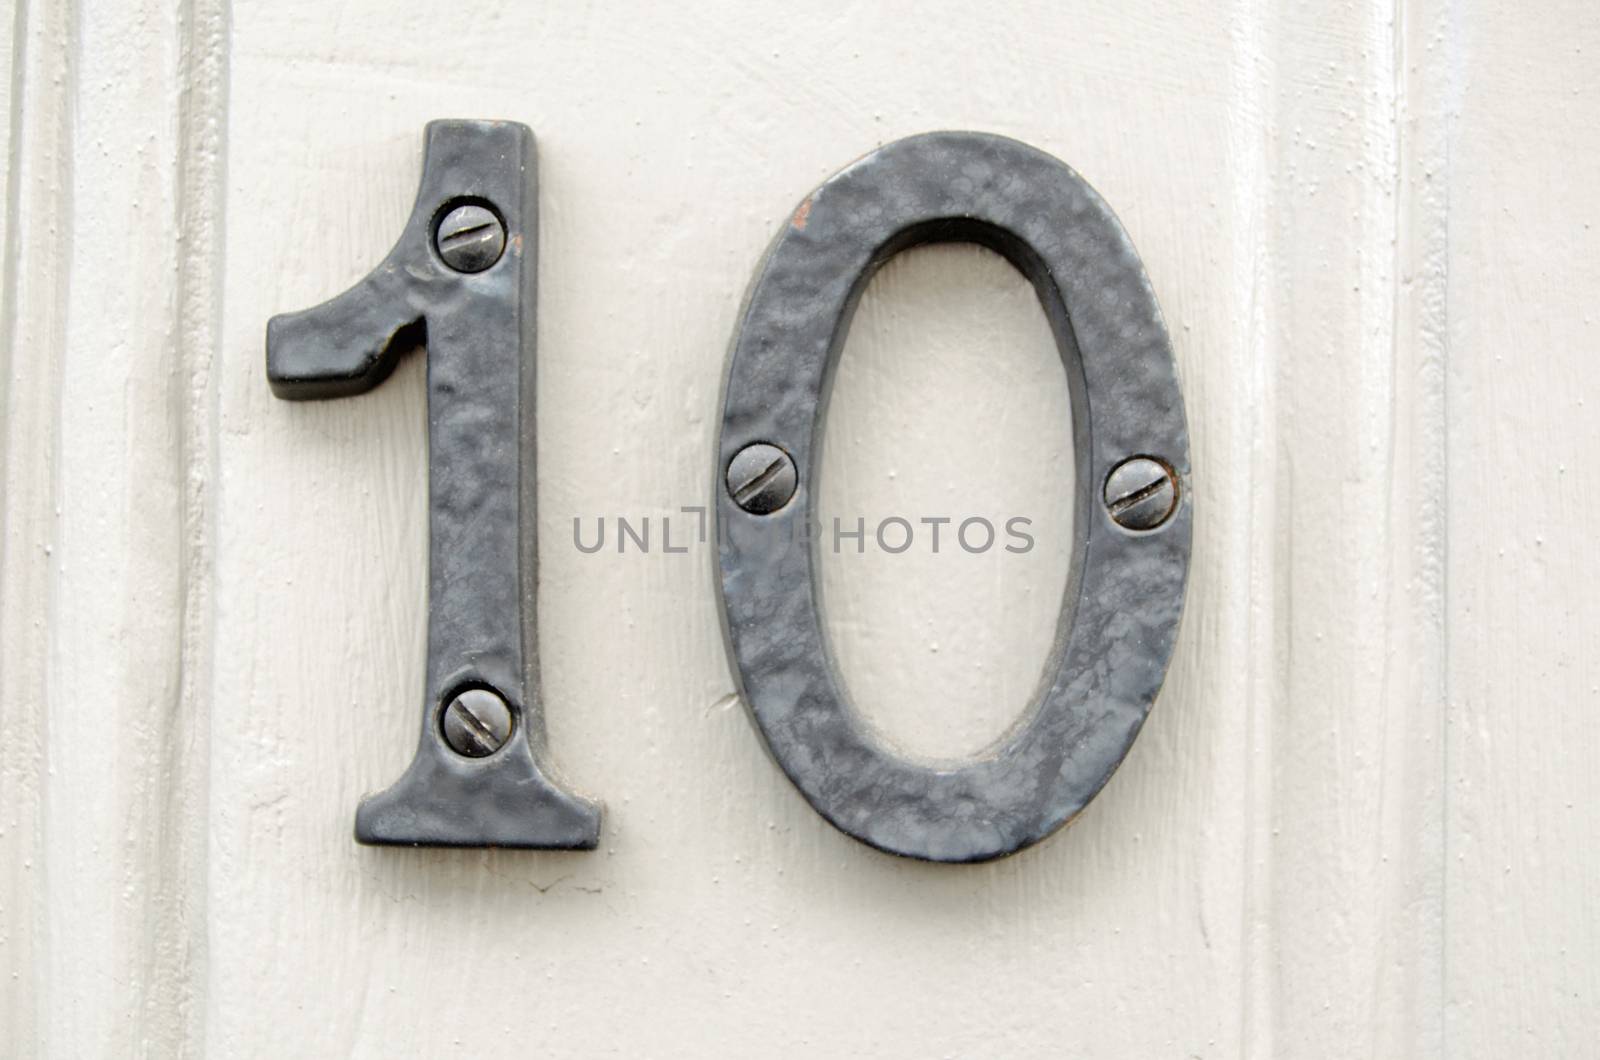 Figures representing number 10 screwed to the outside of a wooden door.